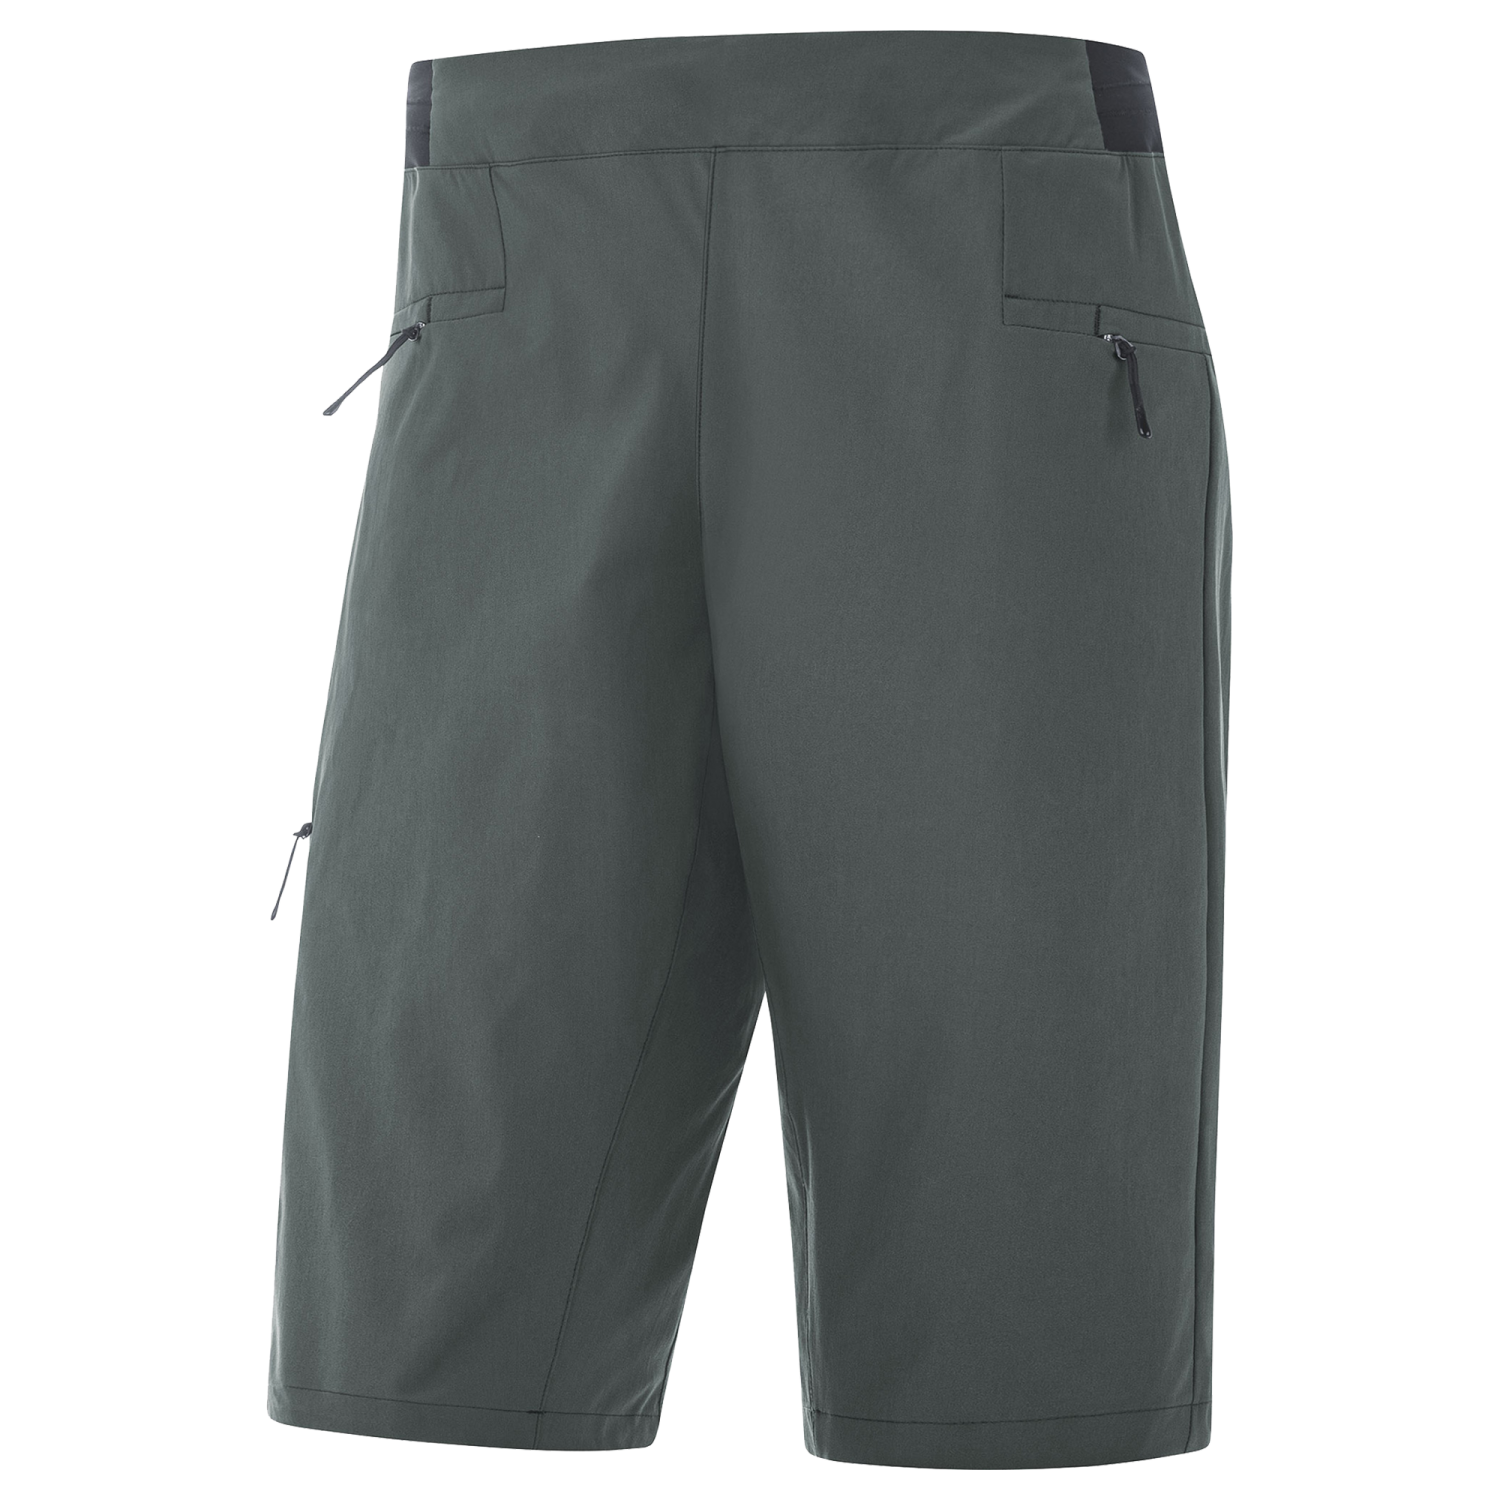 GOREWEAR Explore Cycling Shorts Women's in Urban Gray | Small (4-6) | Slim fit